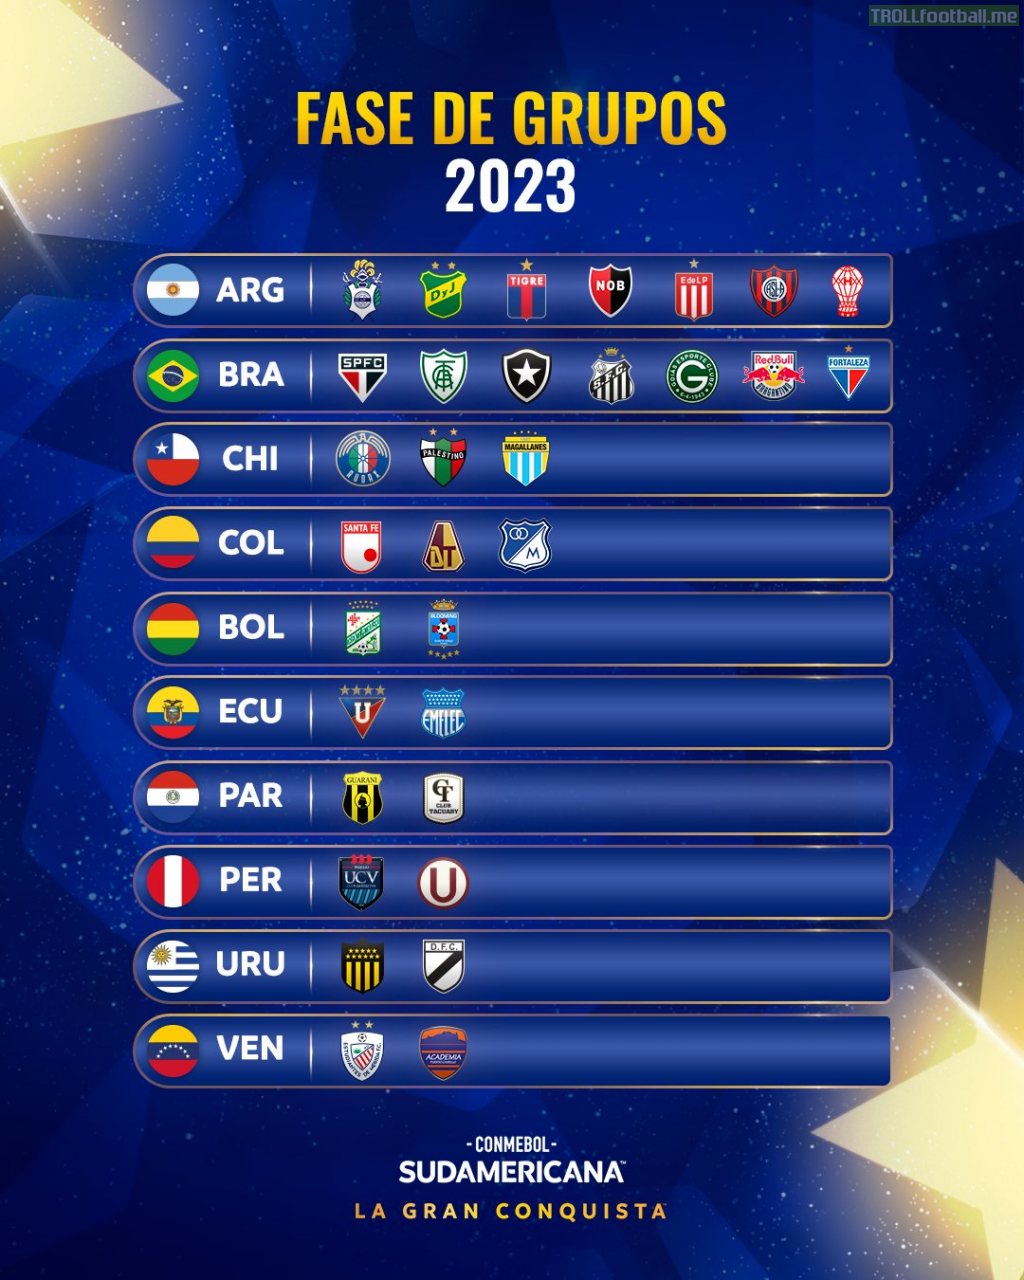 Copa Sudamericana group stage: All 32 teams that will compete have been confirmed